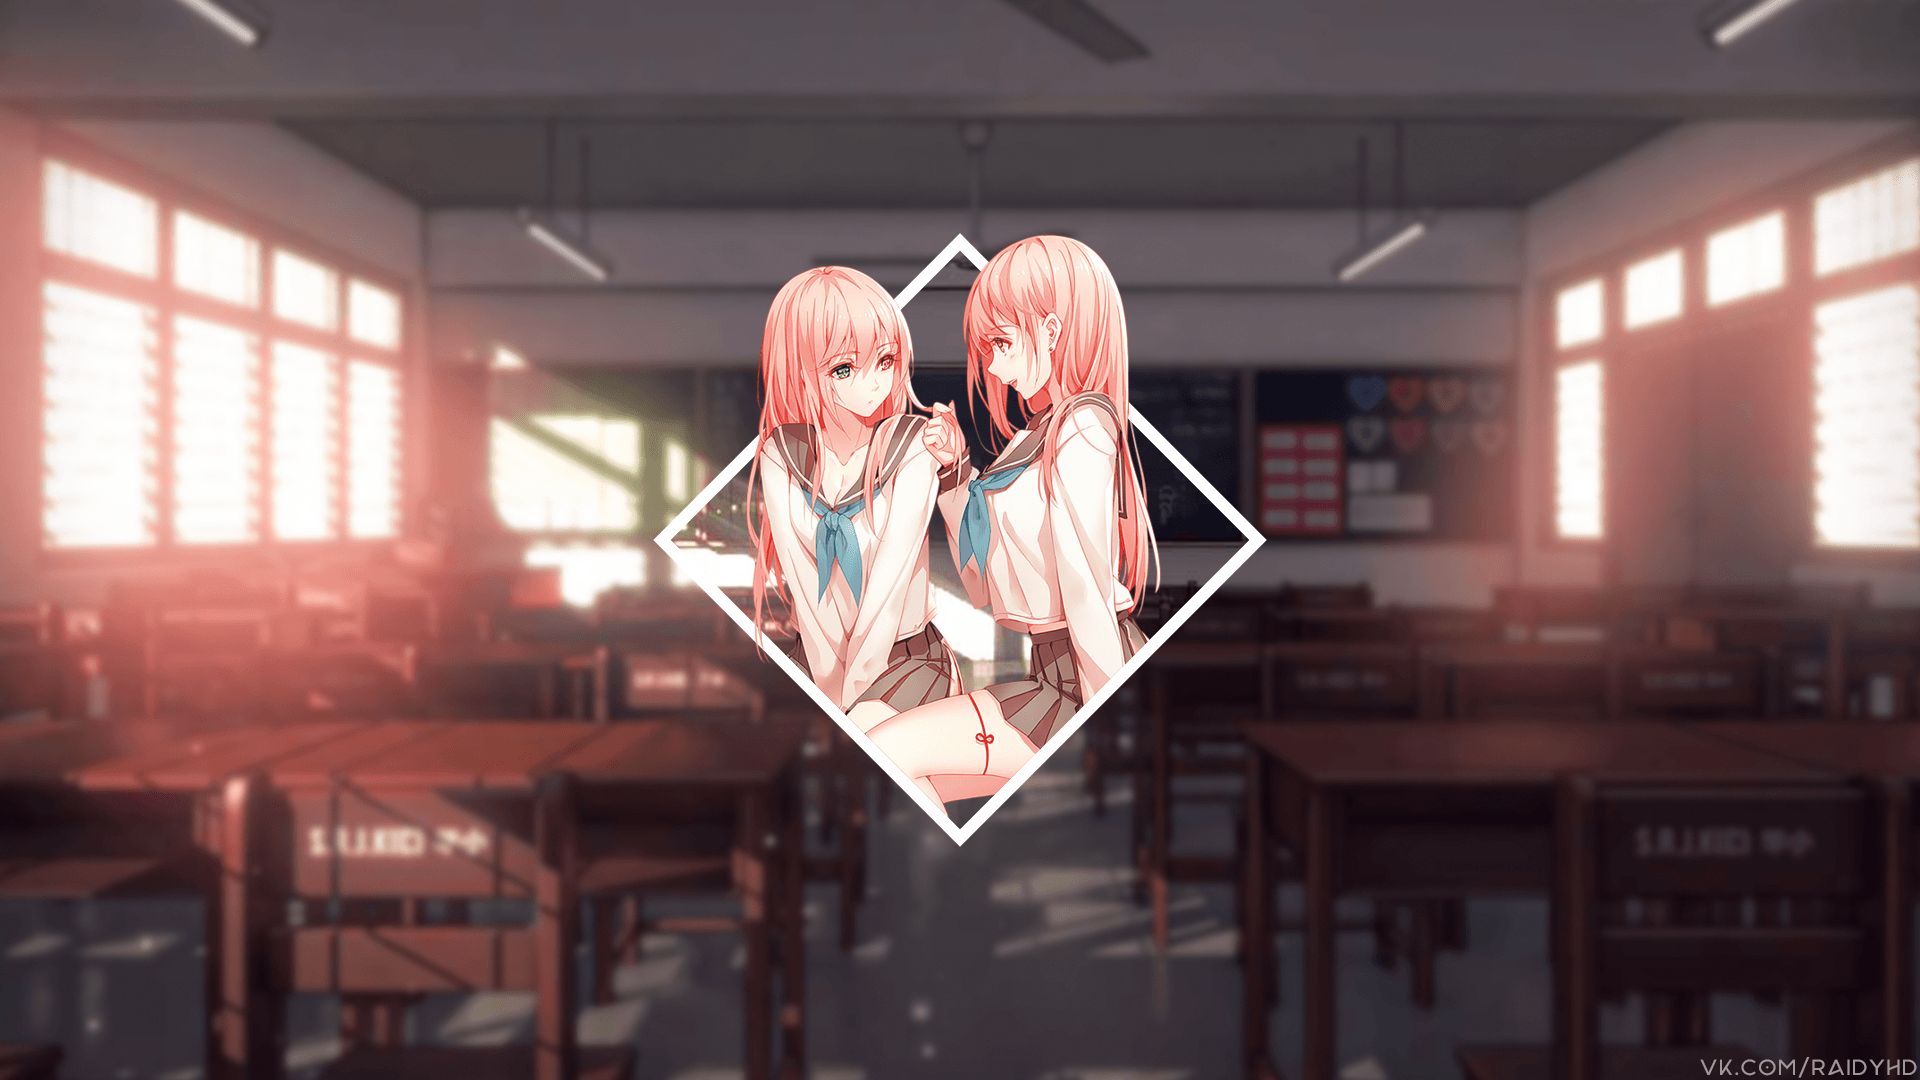 #picture In Picture, #school Uniform, #anime Girls